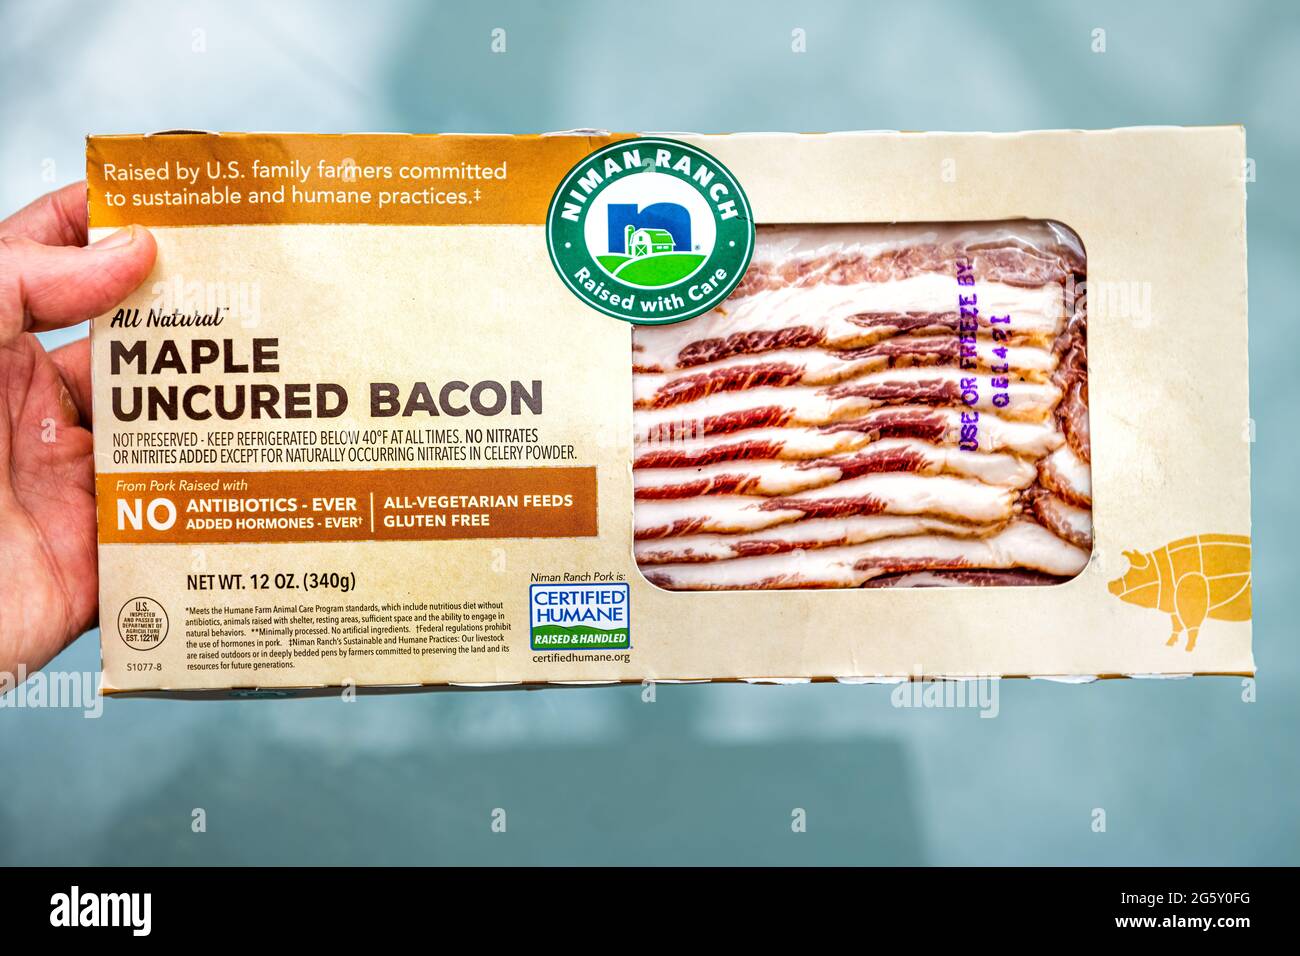 Nellysford, USA - April 29, 2021: Hand holding raw uncured maple bacon meat vacuum sealed label sign text packaged by Niman Ranch with humane practice Stock Photo